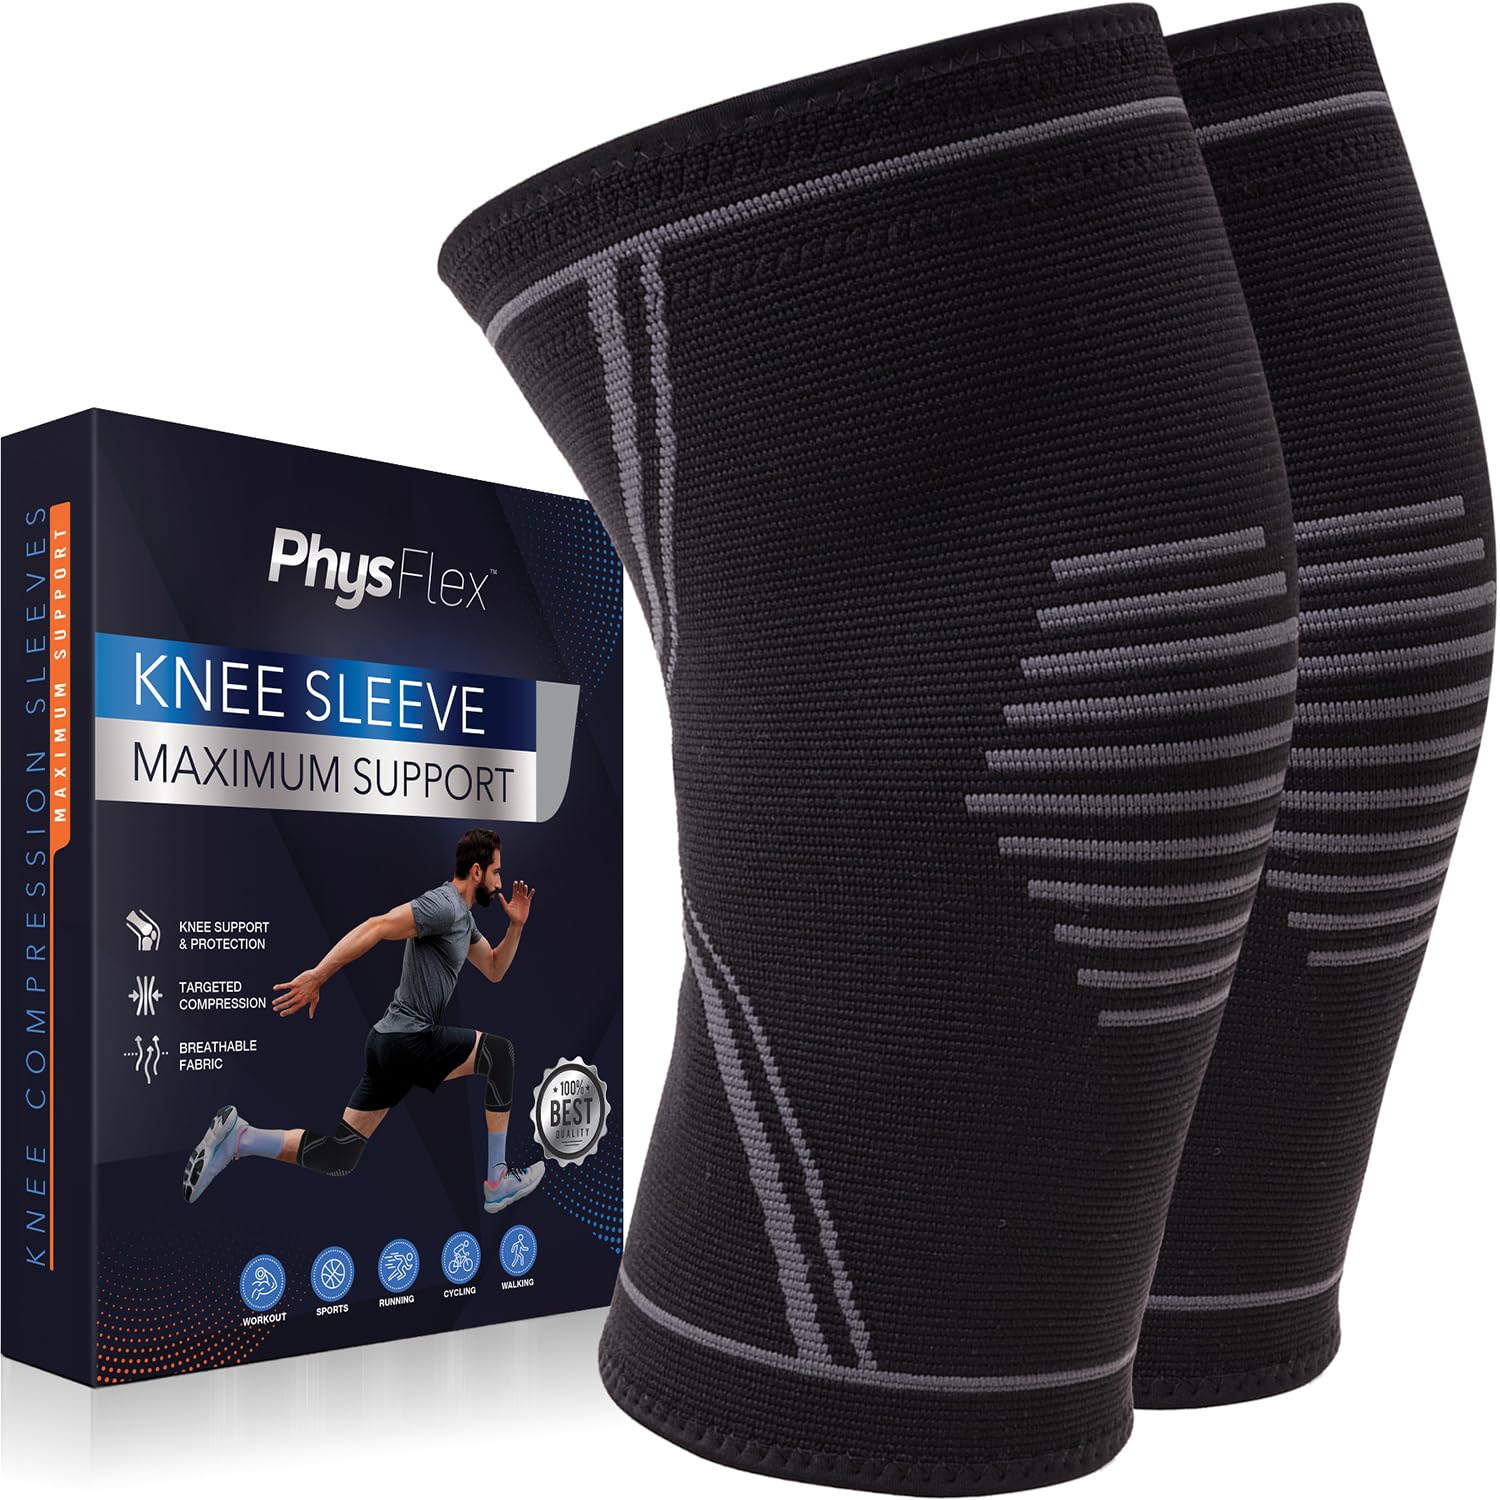 Shoppers Say This $13 Knee Compression Sleeve Relieves Pain